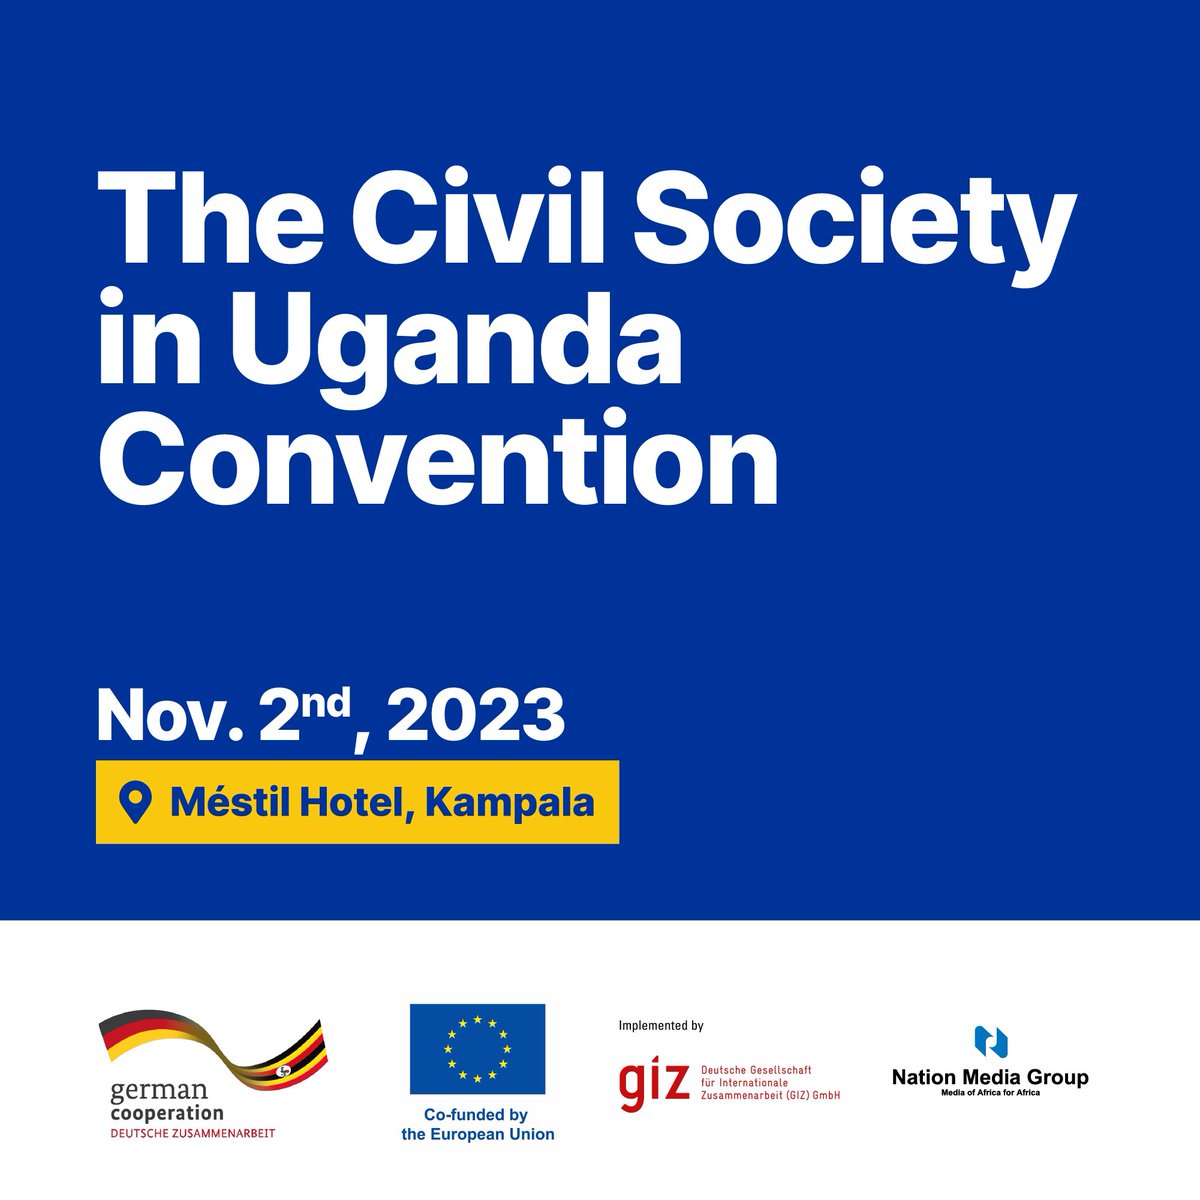 Our ED, Ms. Margaret Sekaggya is attending the #CSOConvention2023. This convention provides an opportunity to asses the overall health & vitality of Uganda’s #CSO sector. Collaboration remains key in  strengthening civil society & its ability to contribute to positive change.